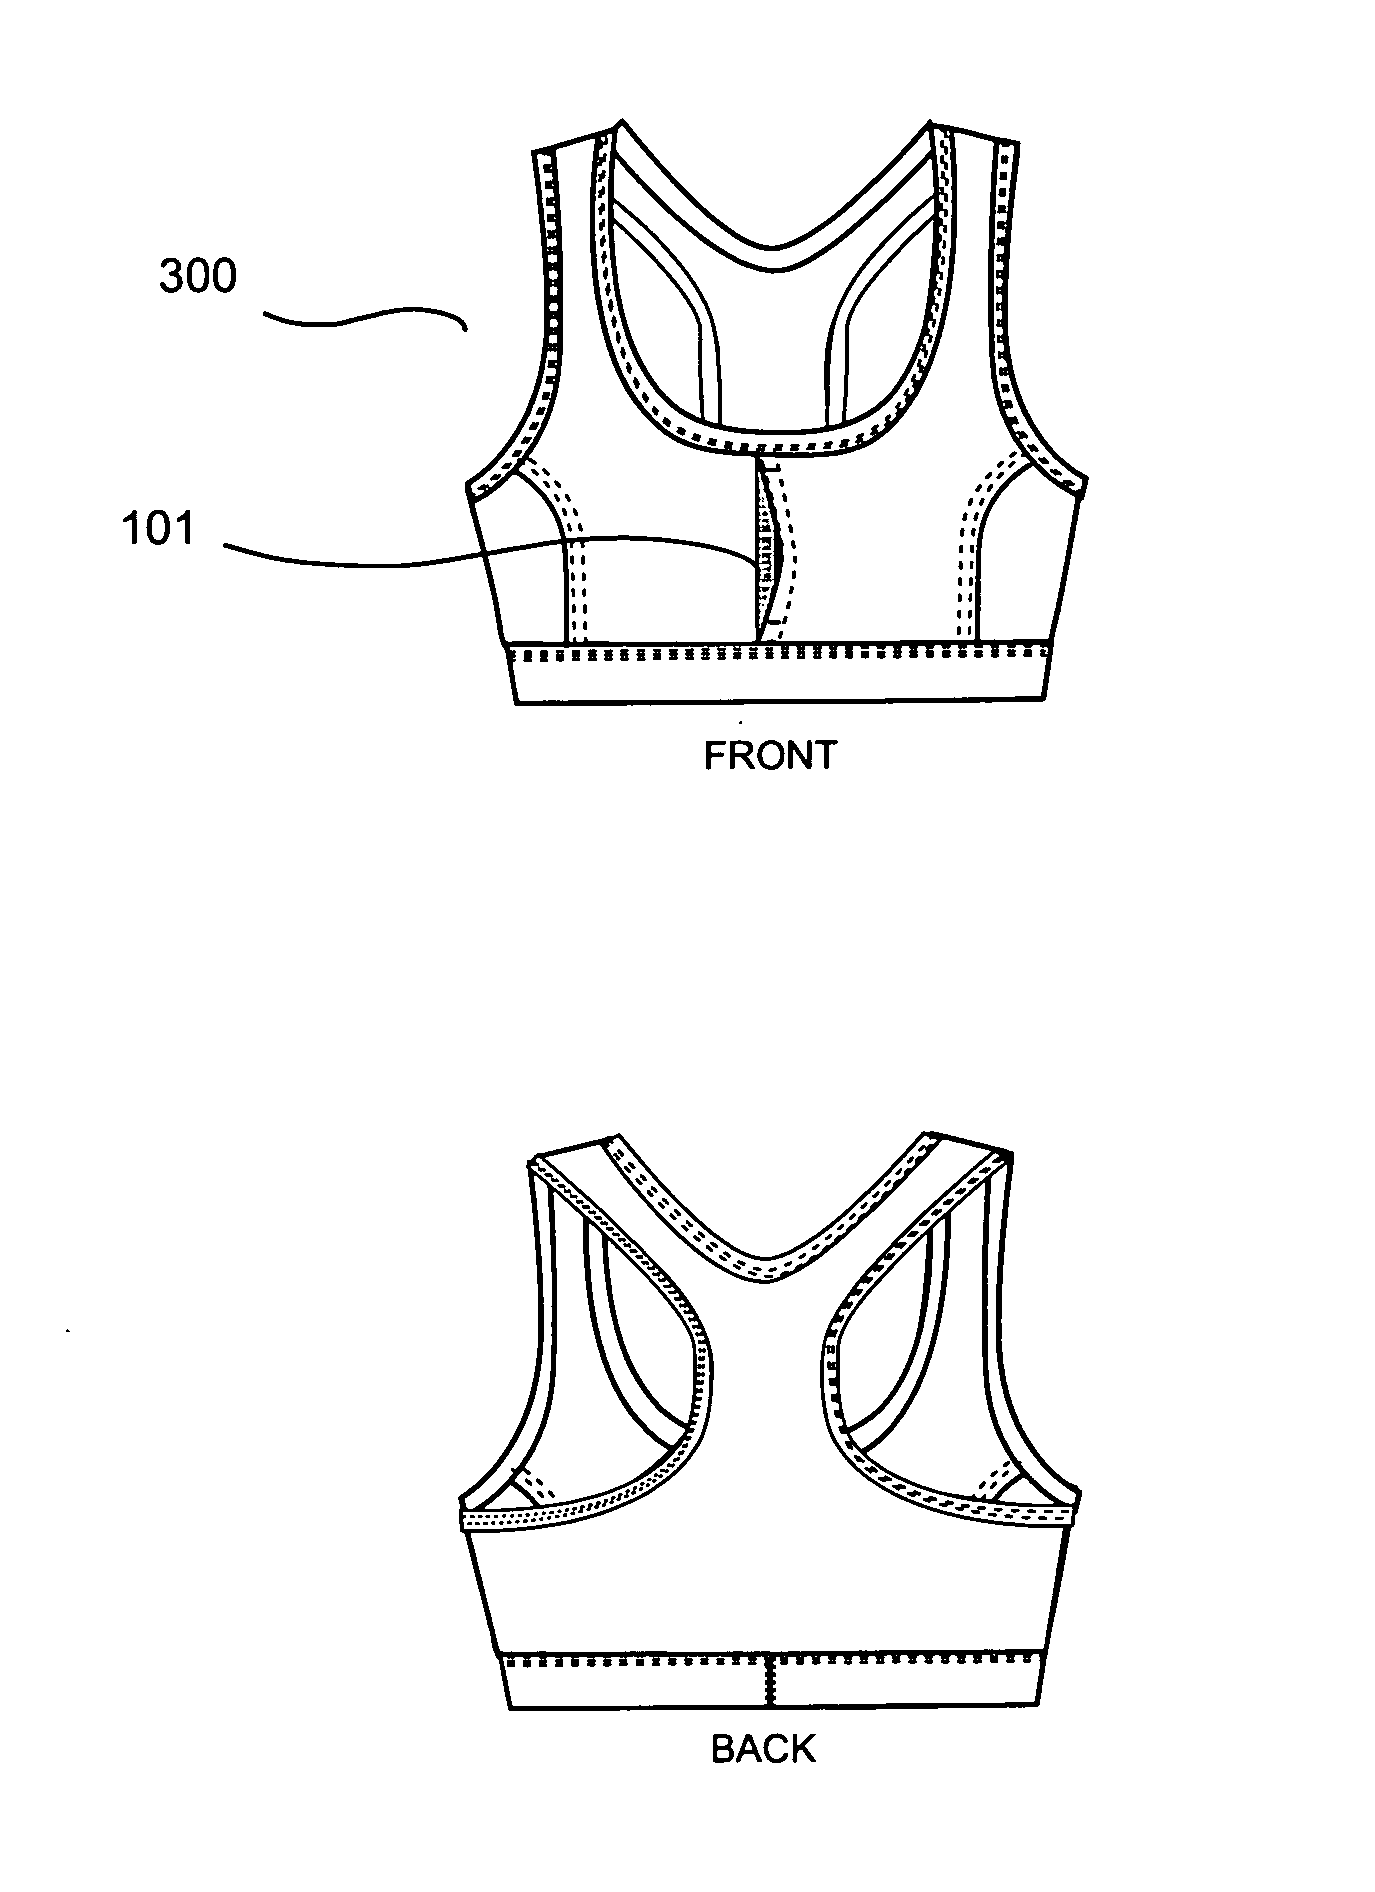 Garment with integrated measuring apparatus